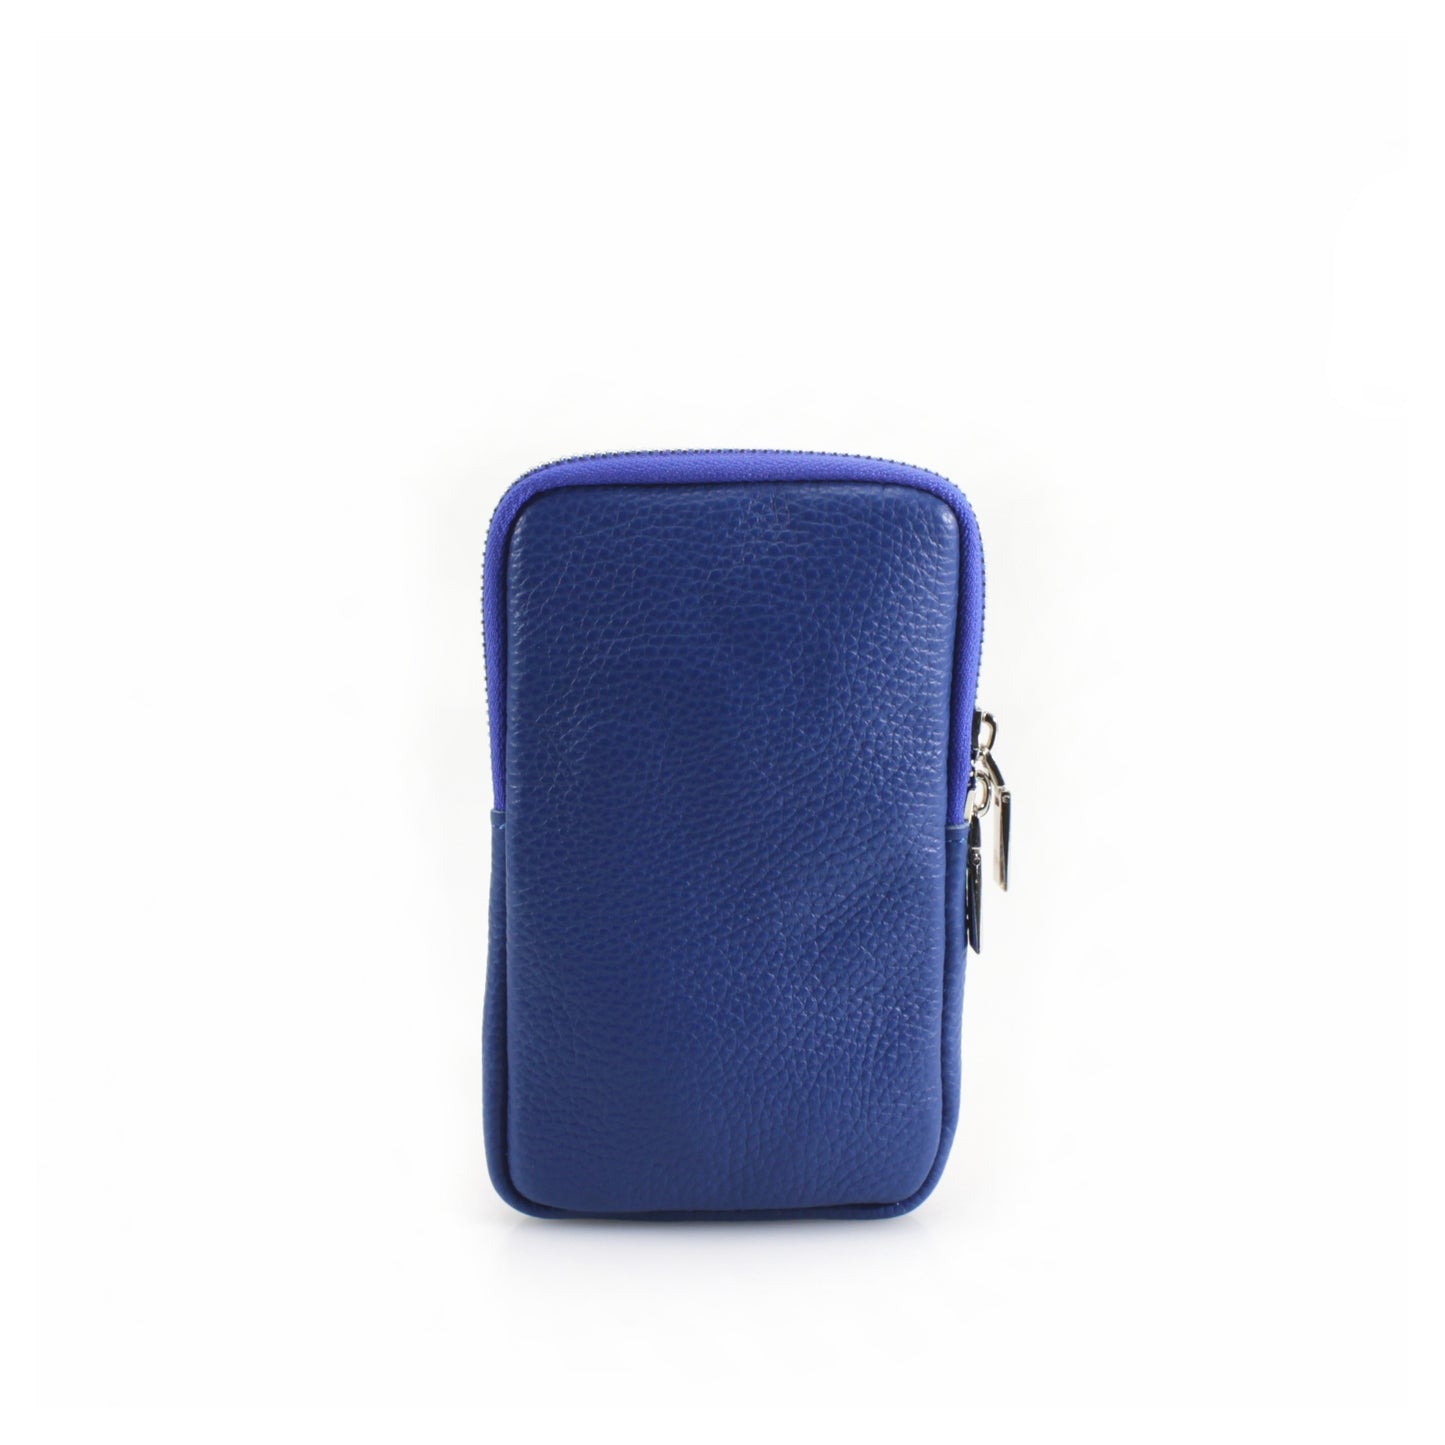 Phone crossbody pouch - Genuine leather